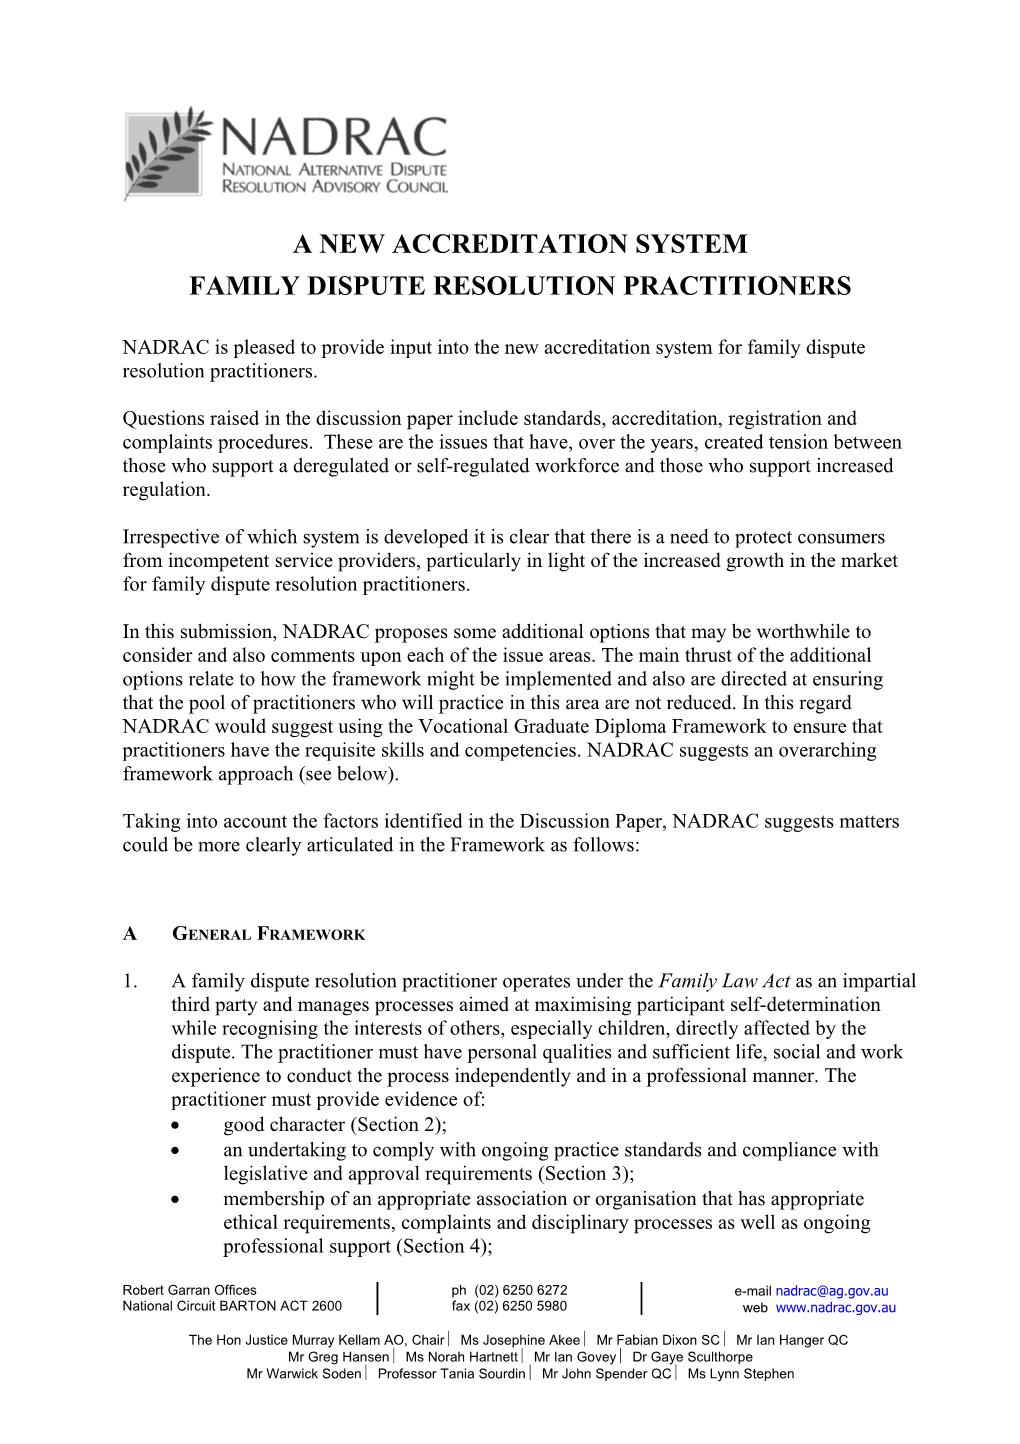 Advice on a New Accreditation System for Family Dispute Resolution Practitioners